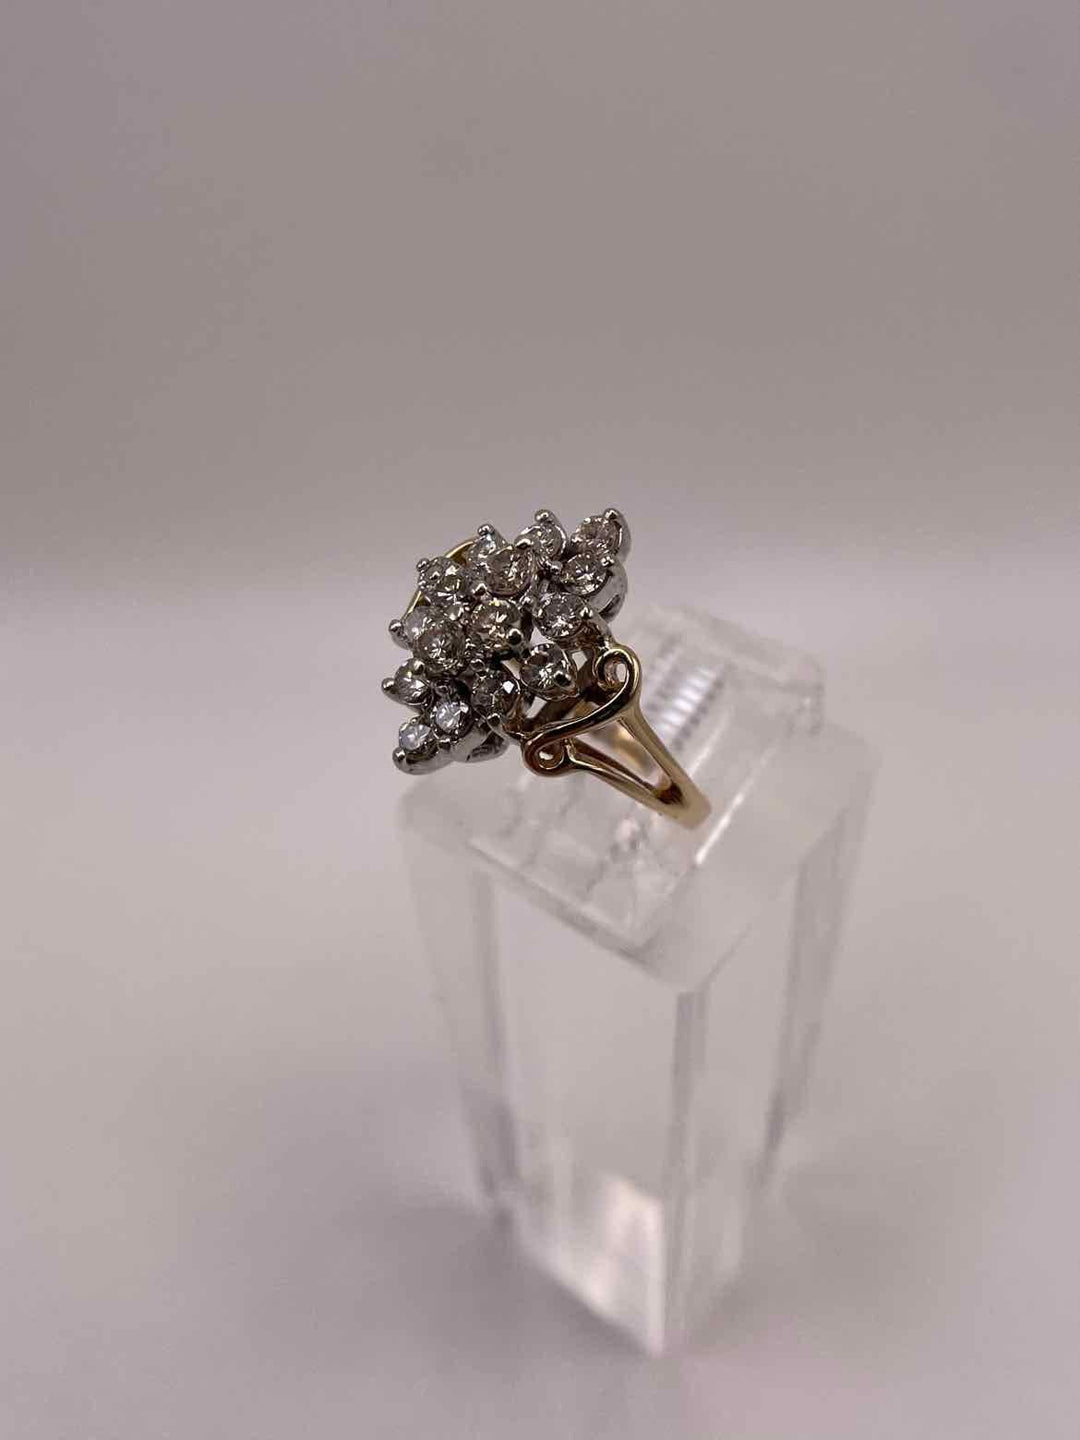 simplyposhconsign Ring 14KY YELLOW GOLD 16 DIAMOND CLUSTER RING